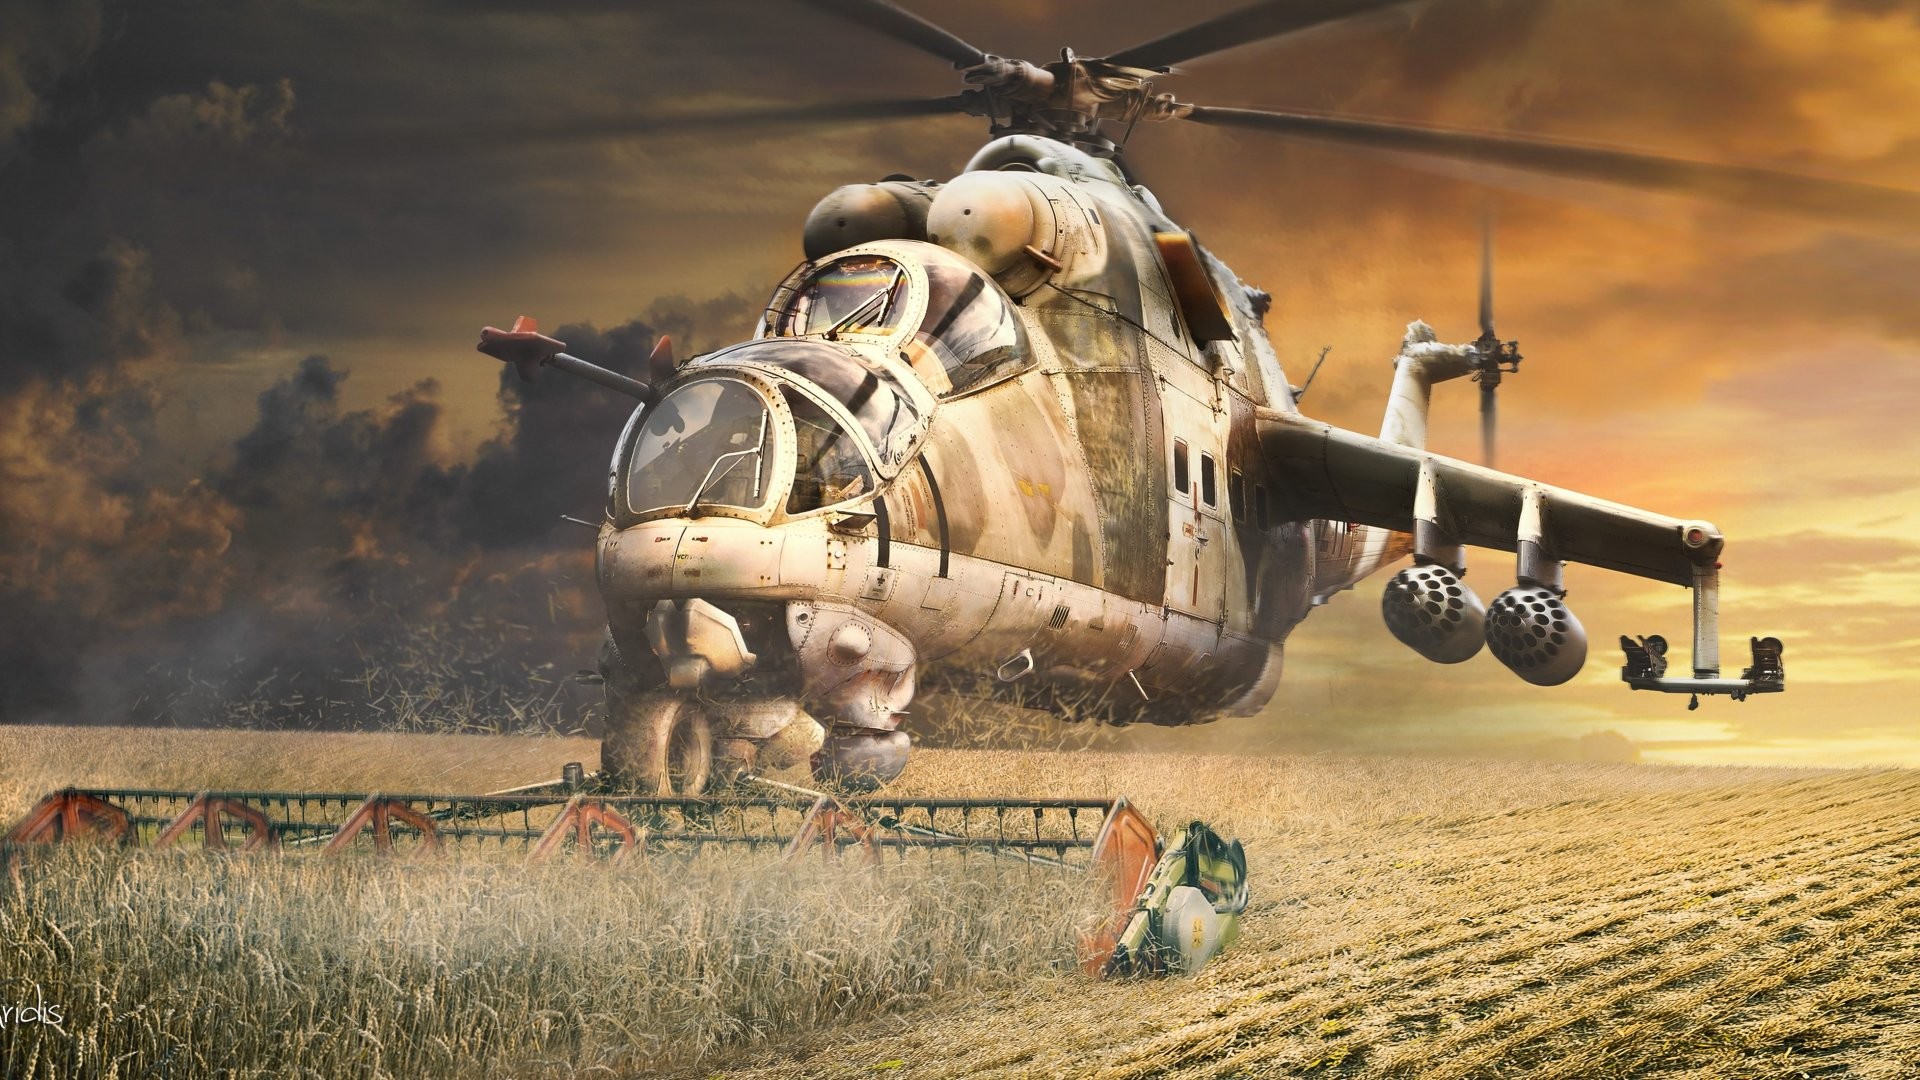 General 1920x1080 aircraft military aircraft helicopters field humor artwork plants sky Mil Mi-24 harvester attack helicopters